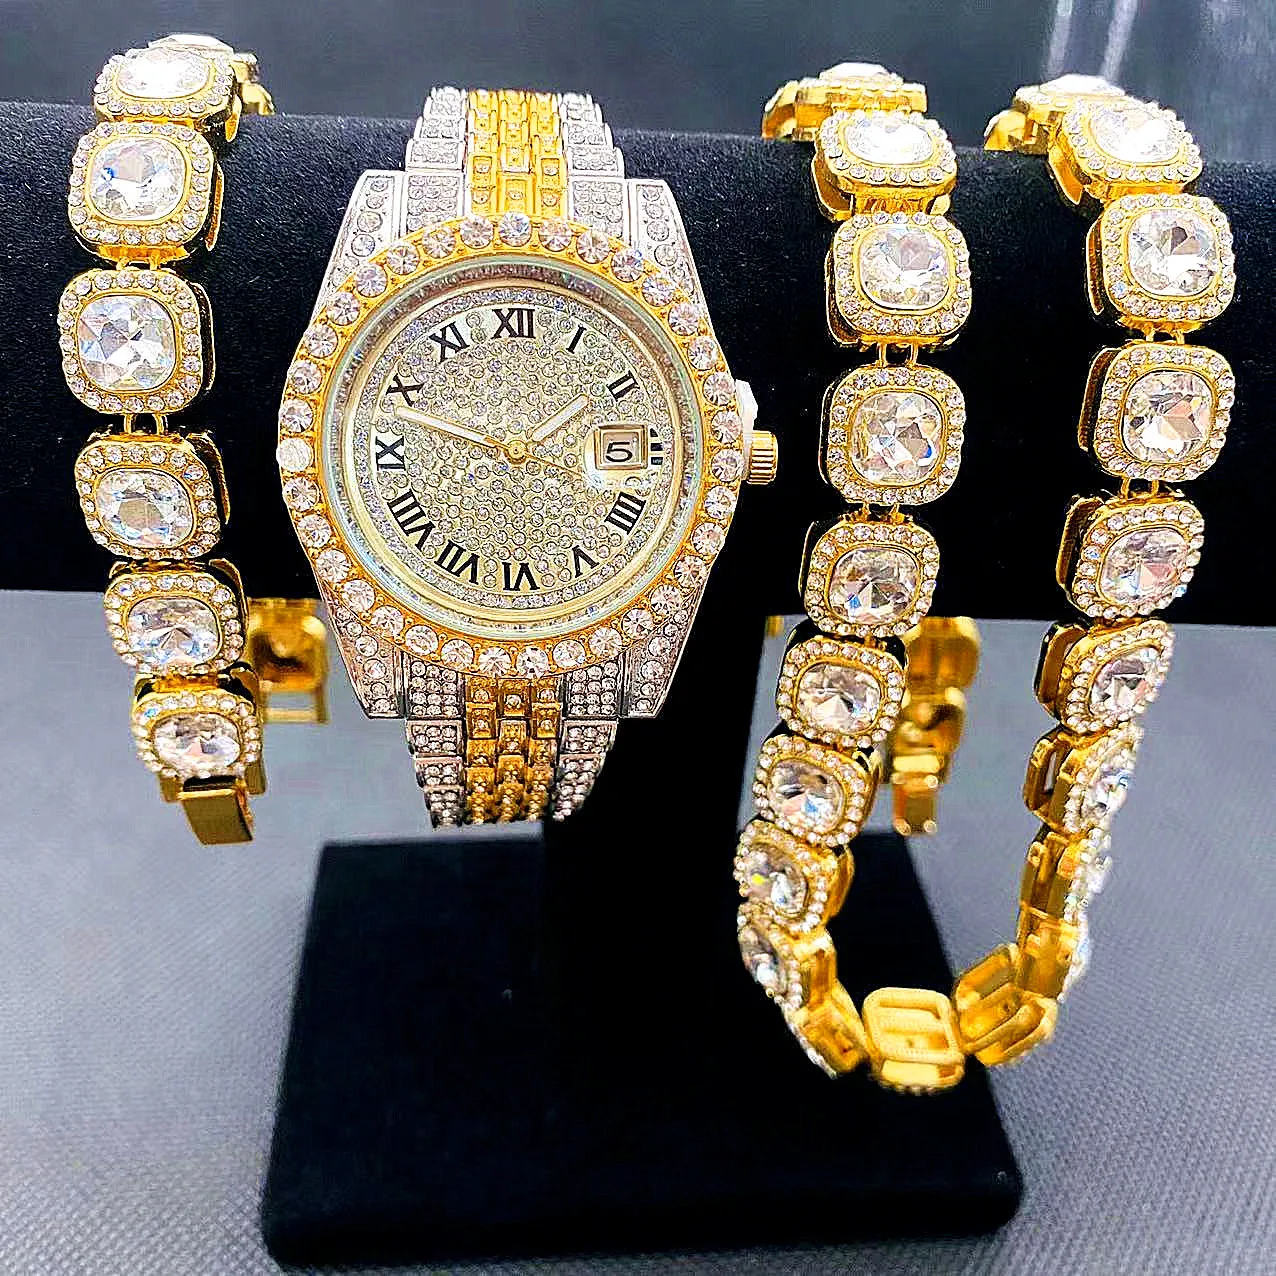 3PCS Full Iced Out Watches Gold Cuban Tennis Chain Bracelet Necklaces Bling Watch for Mens Hip Hop Jewelry Set Men Watch Clock 3pcs iced out cuban tennis chains necklace watches quartz women men s silver color bracelet set hip hop clock jewelry gifts